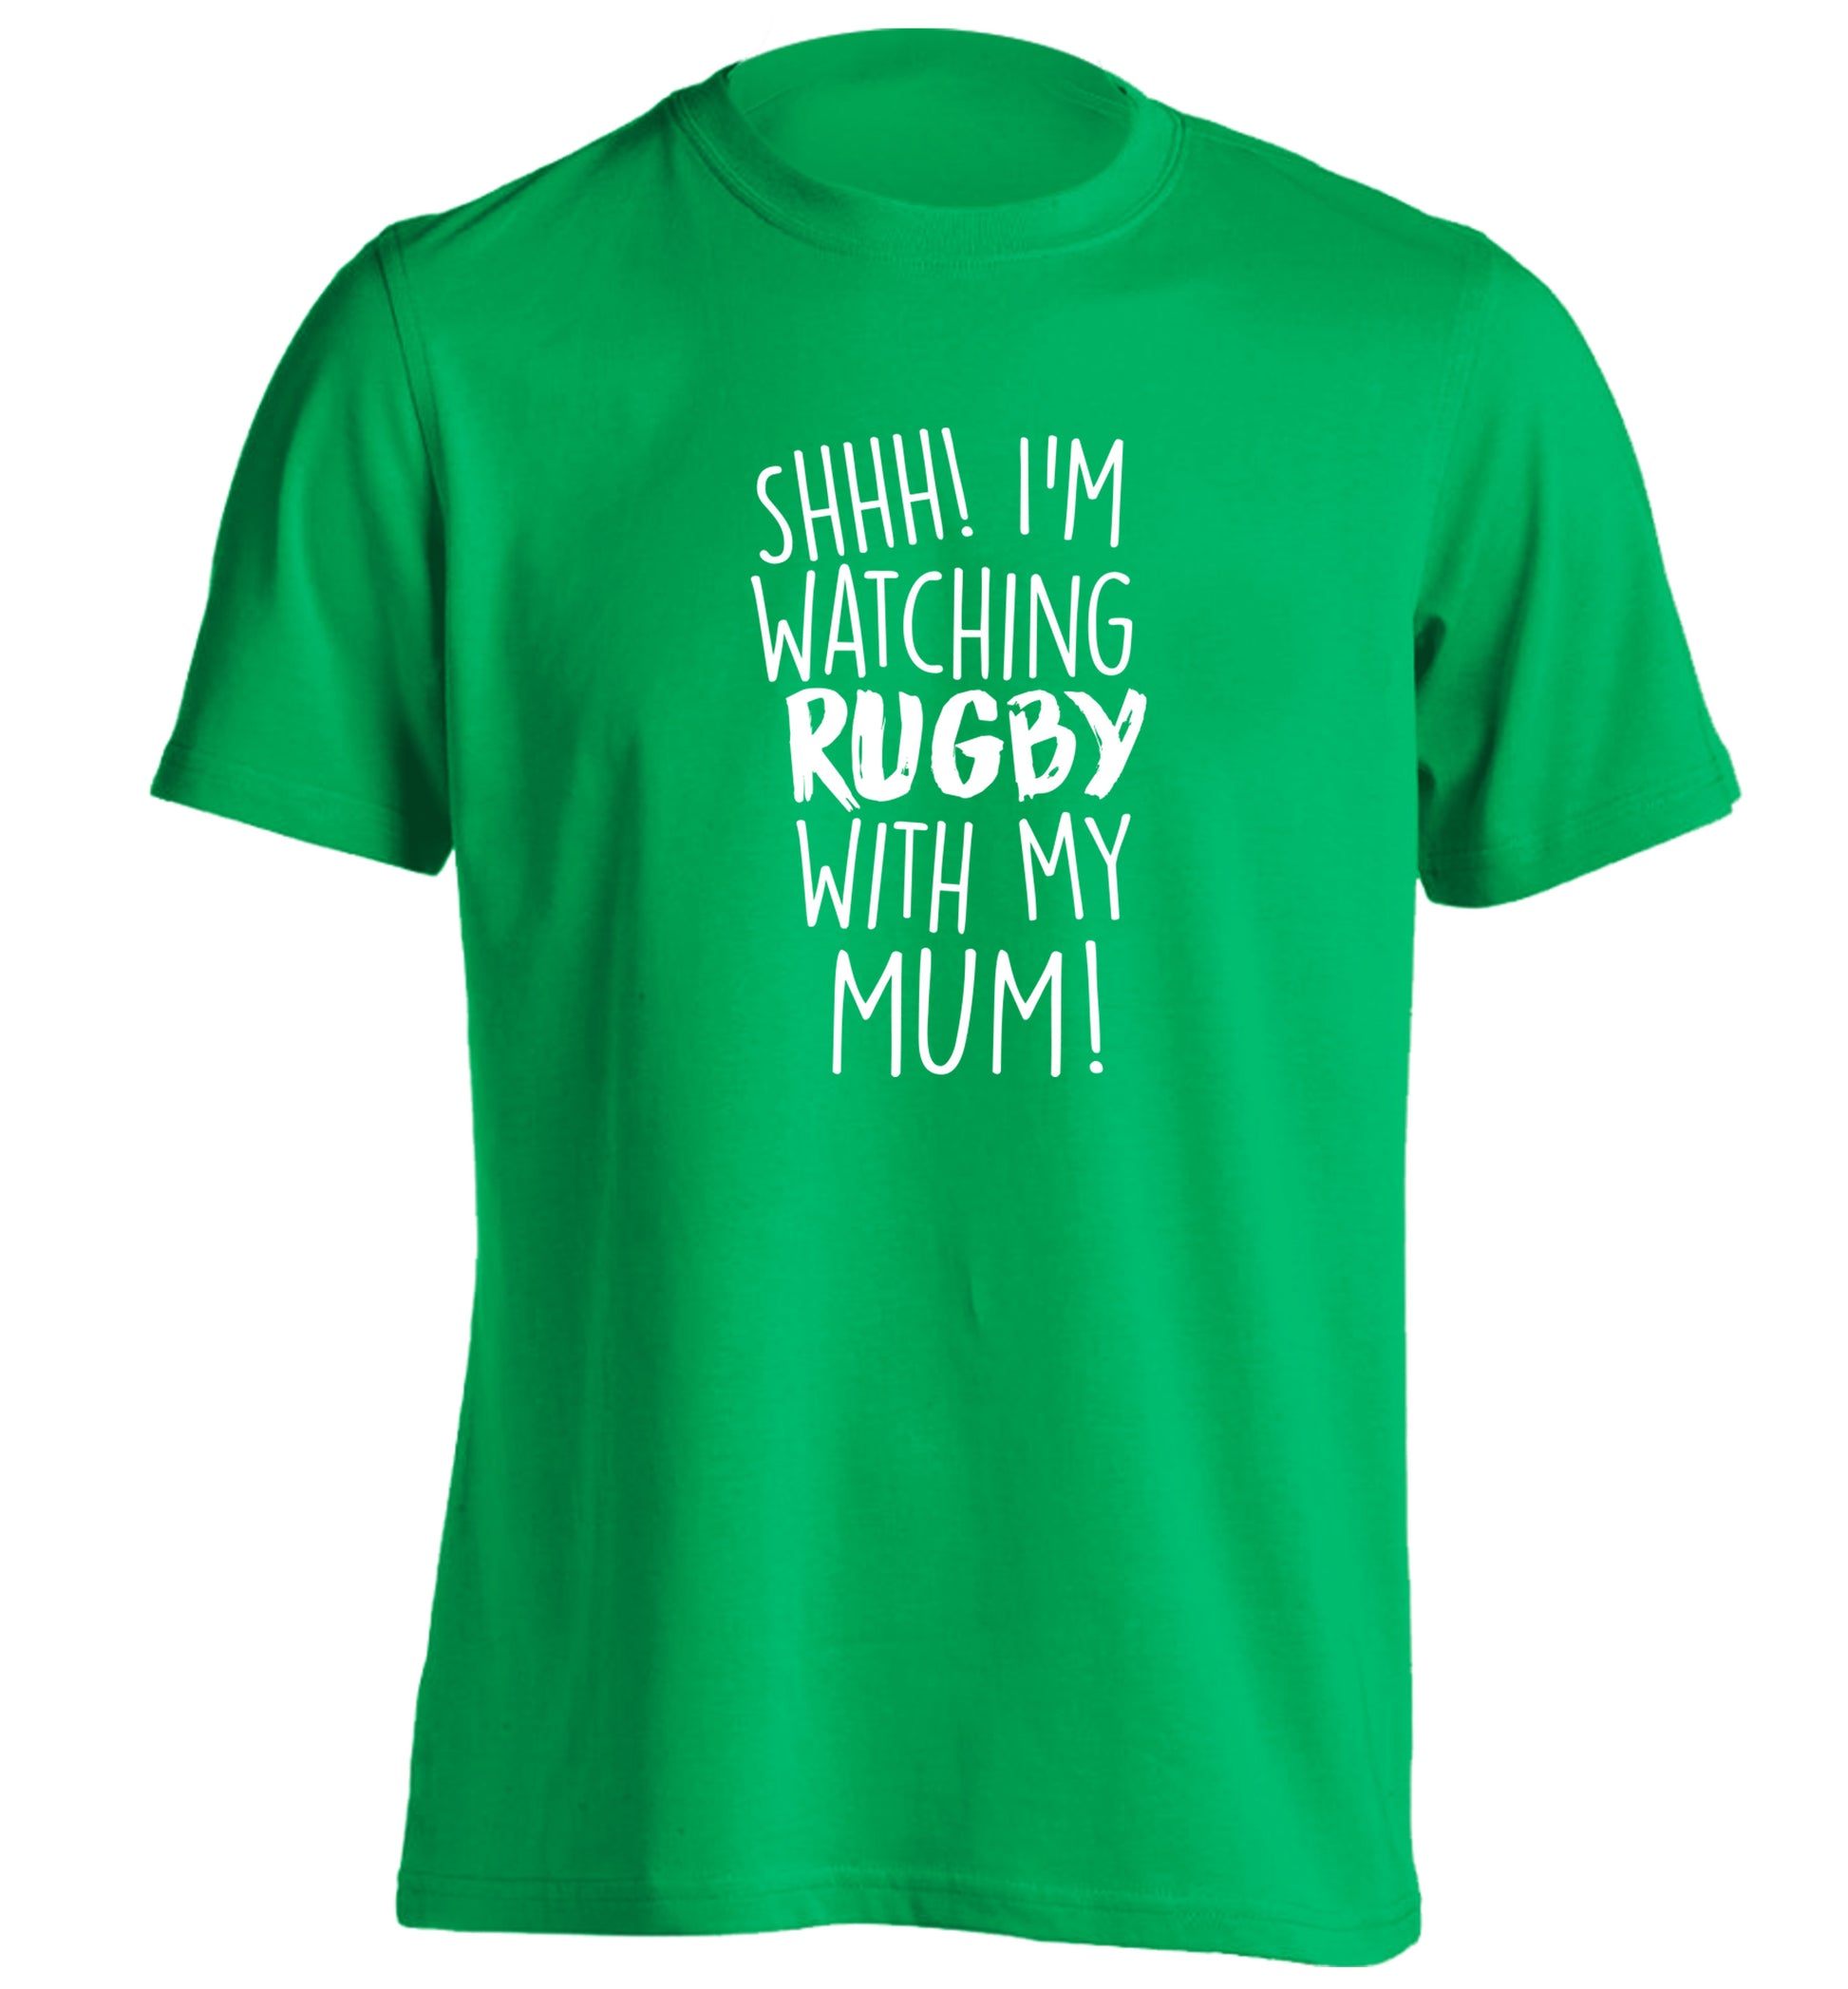 Shh... I'm watching rugby with my mum adults unisex green Tshirt 2XL